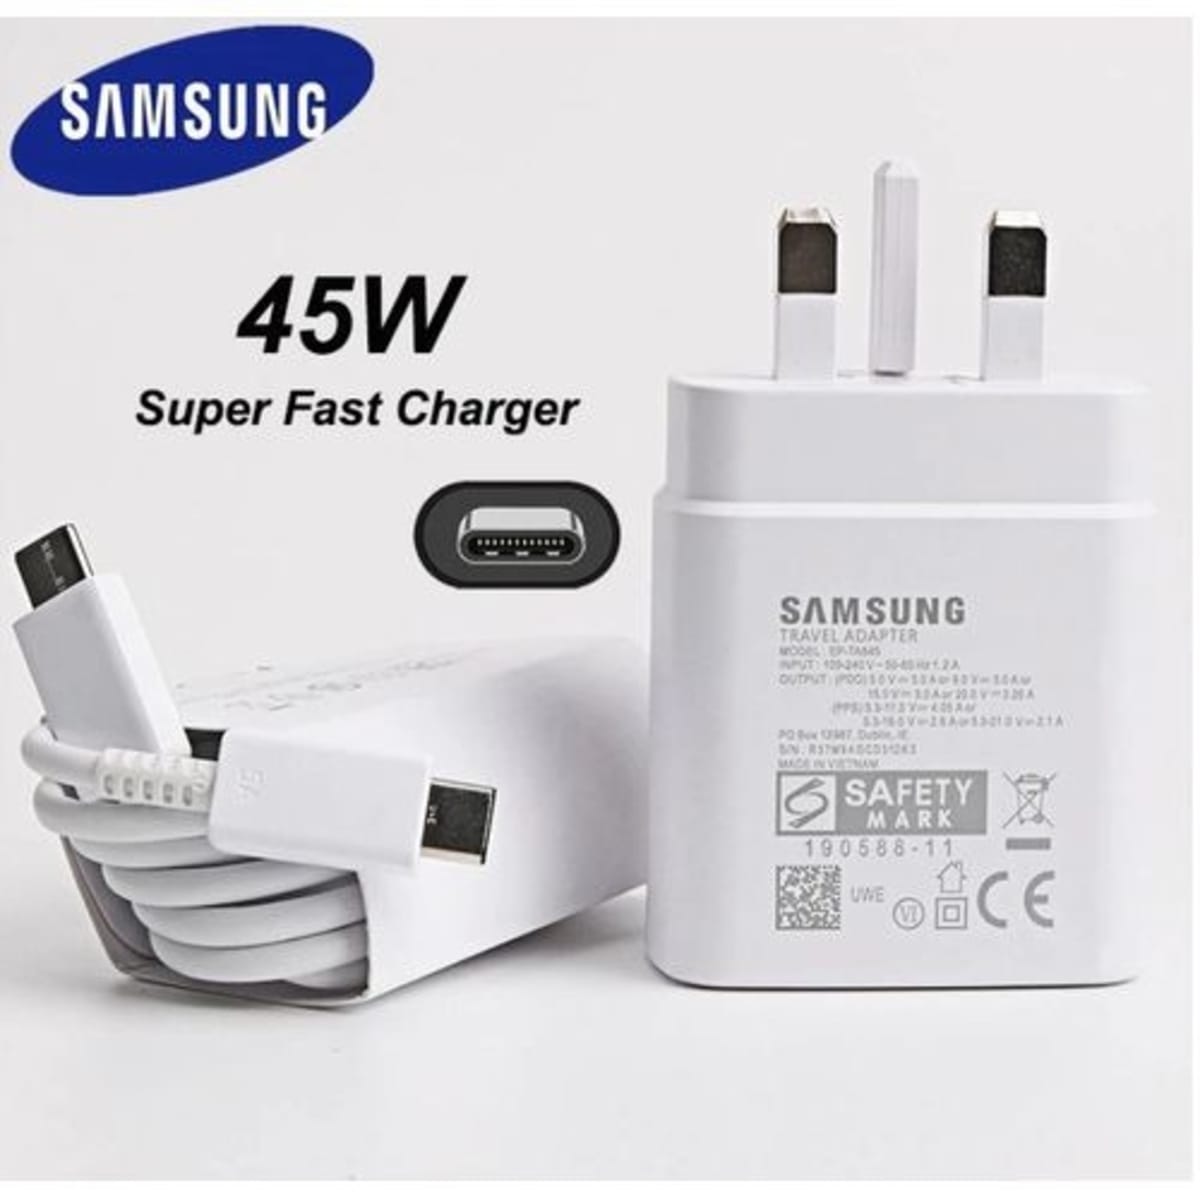 Original Samsung 45W Super Fast Charger USB-C For Galaxy S22 S21